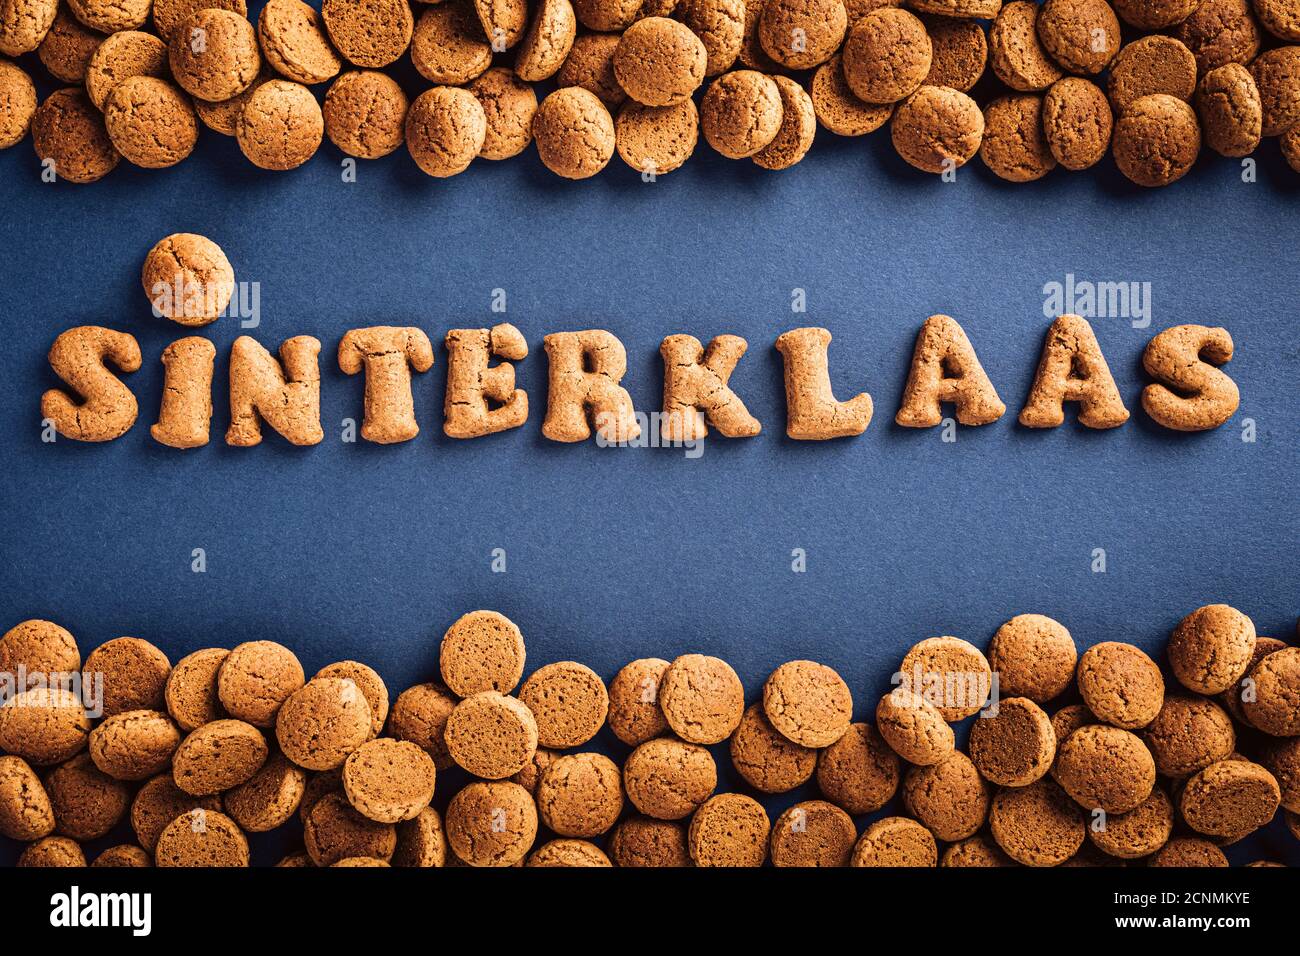 st. Nicholas day in the Netherlands Stock Photo